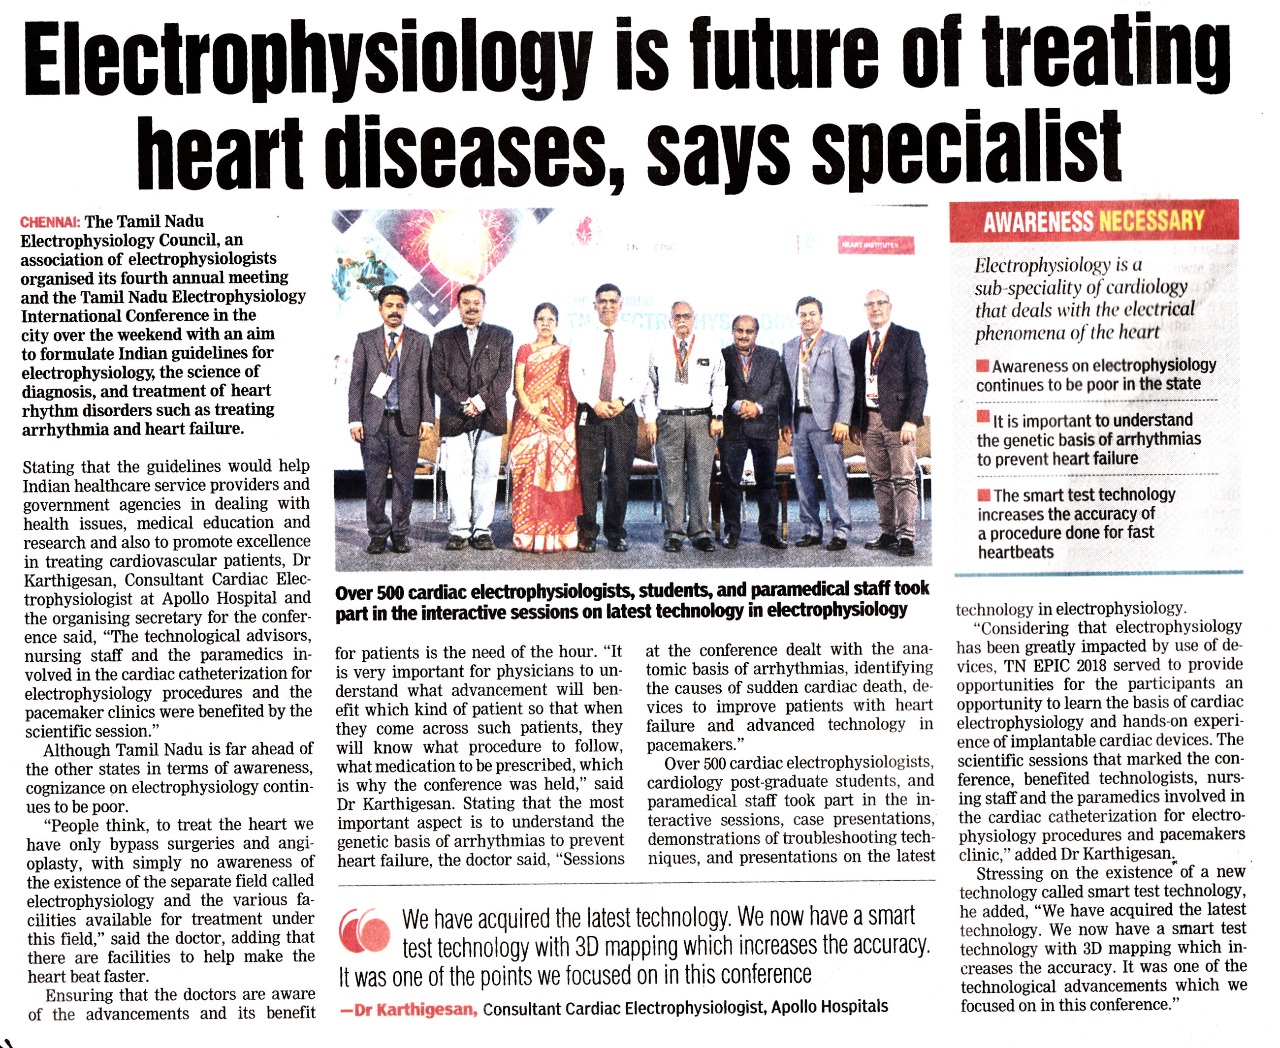 News clipping on 'Electrophysiology is the future of treating heart diseases'.